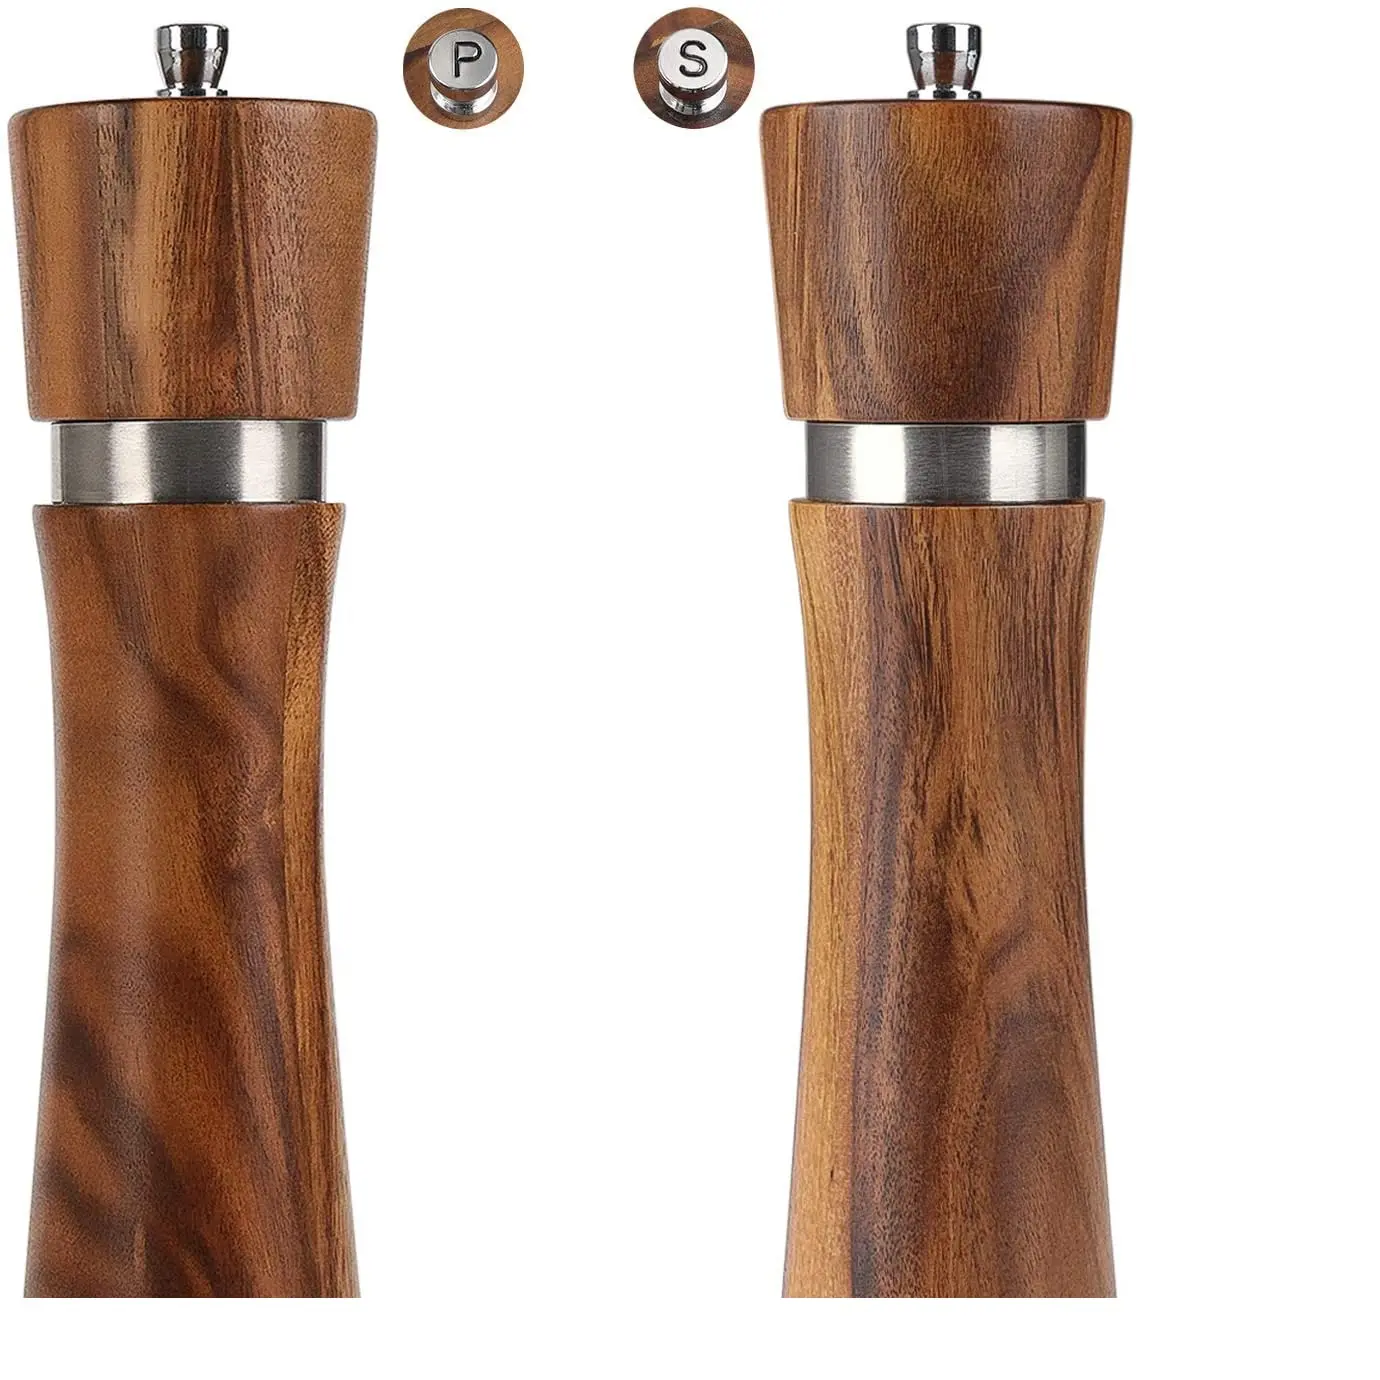 Houselin Acacia Wood Salt and Pepper Grinder / Mills set Amazon Acacia Kit Grinder/Mill Set pepper mill with  metal ring